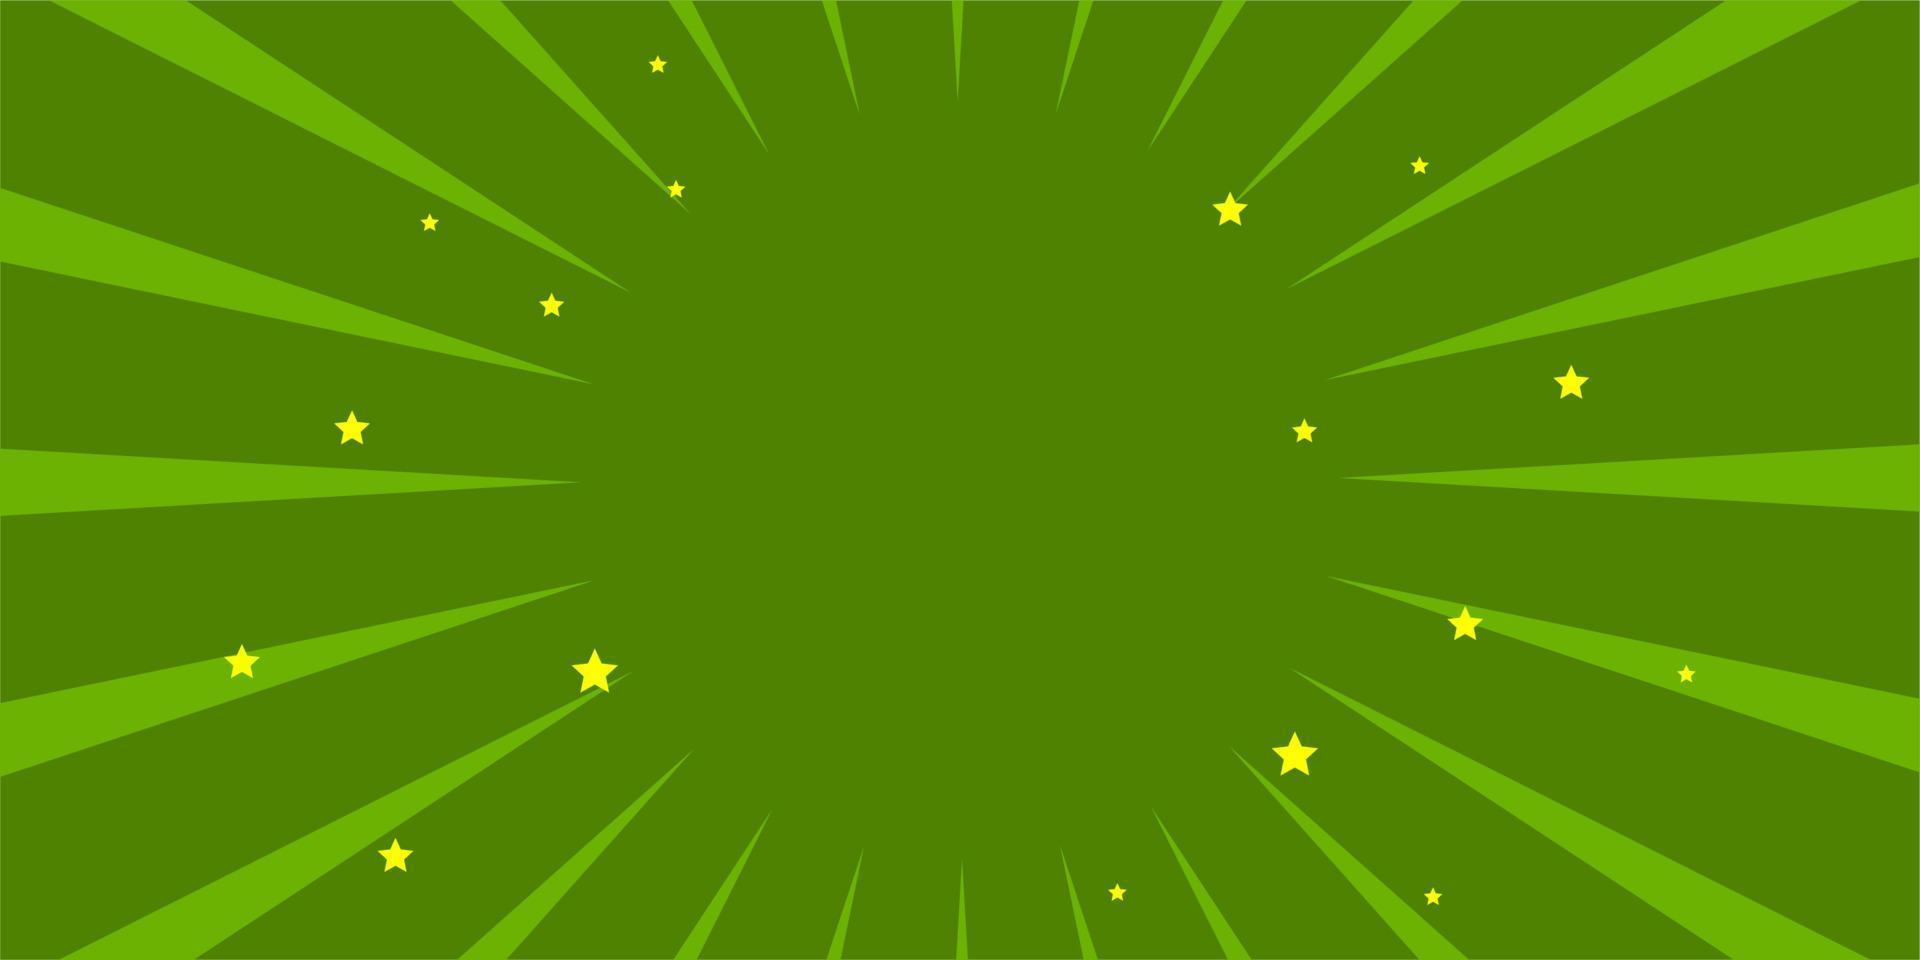 Comic green background with star vector